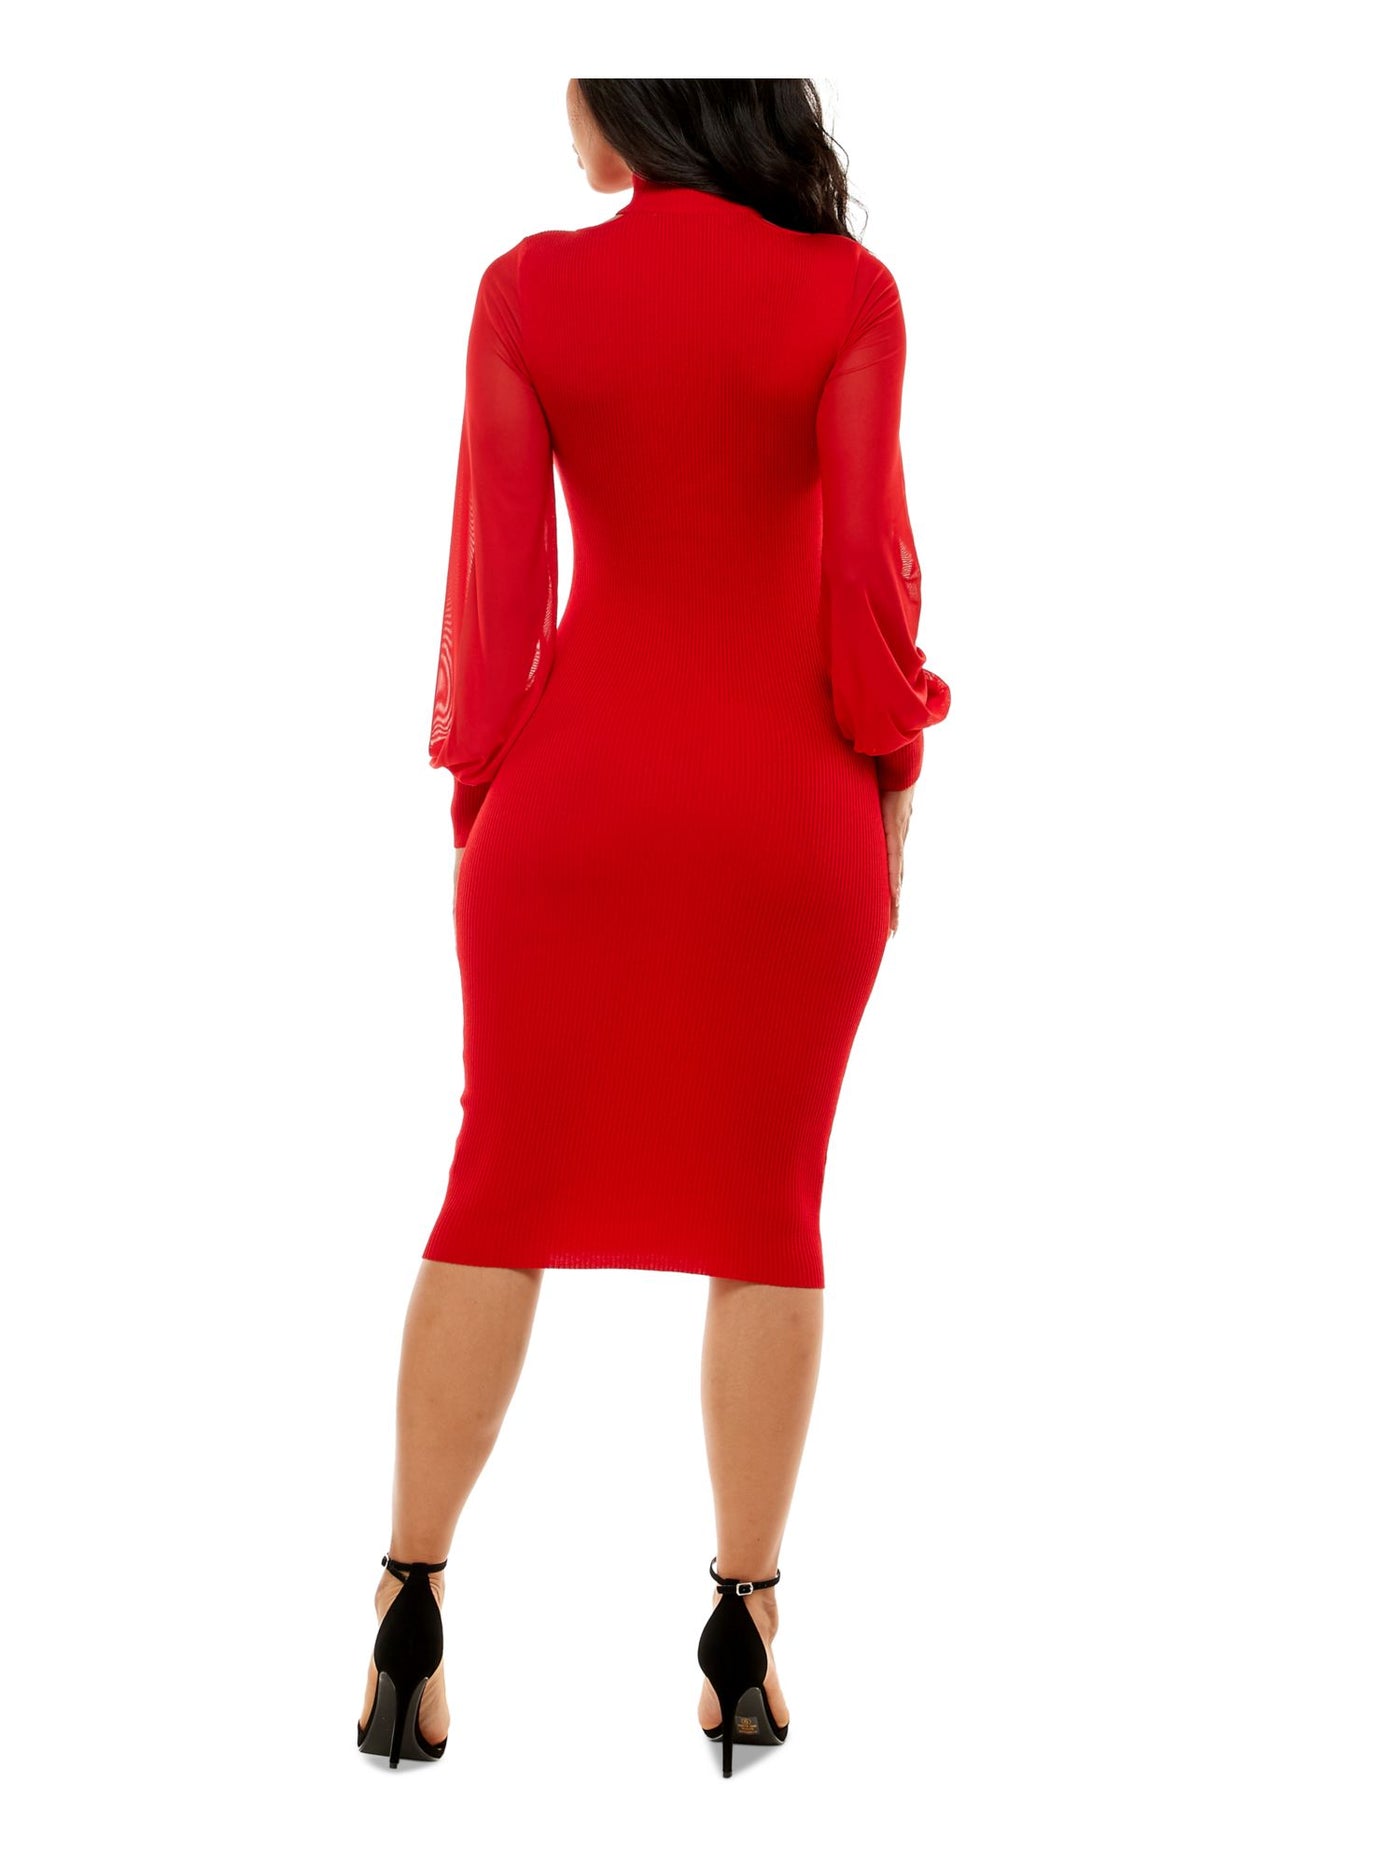 CRAVE FAME Womens Red Cut Out Ribbed Long Illusion Sleeves Mock Neck Below The Knee Party Body Con Dress Juniors M